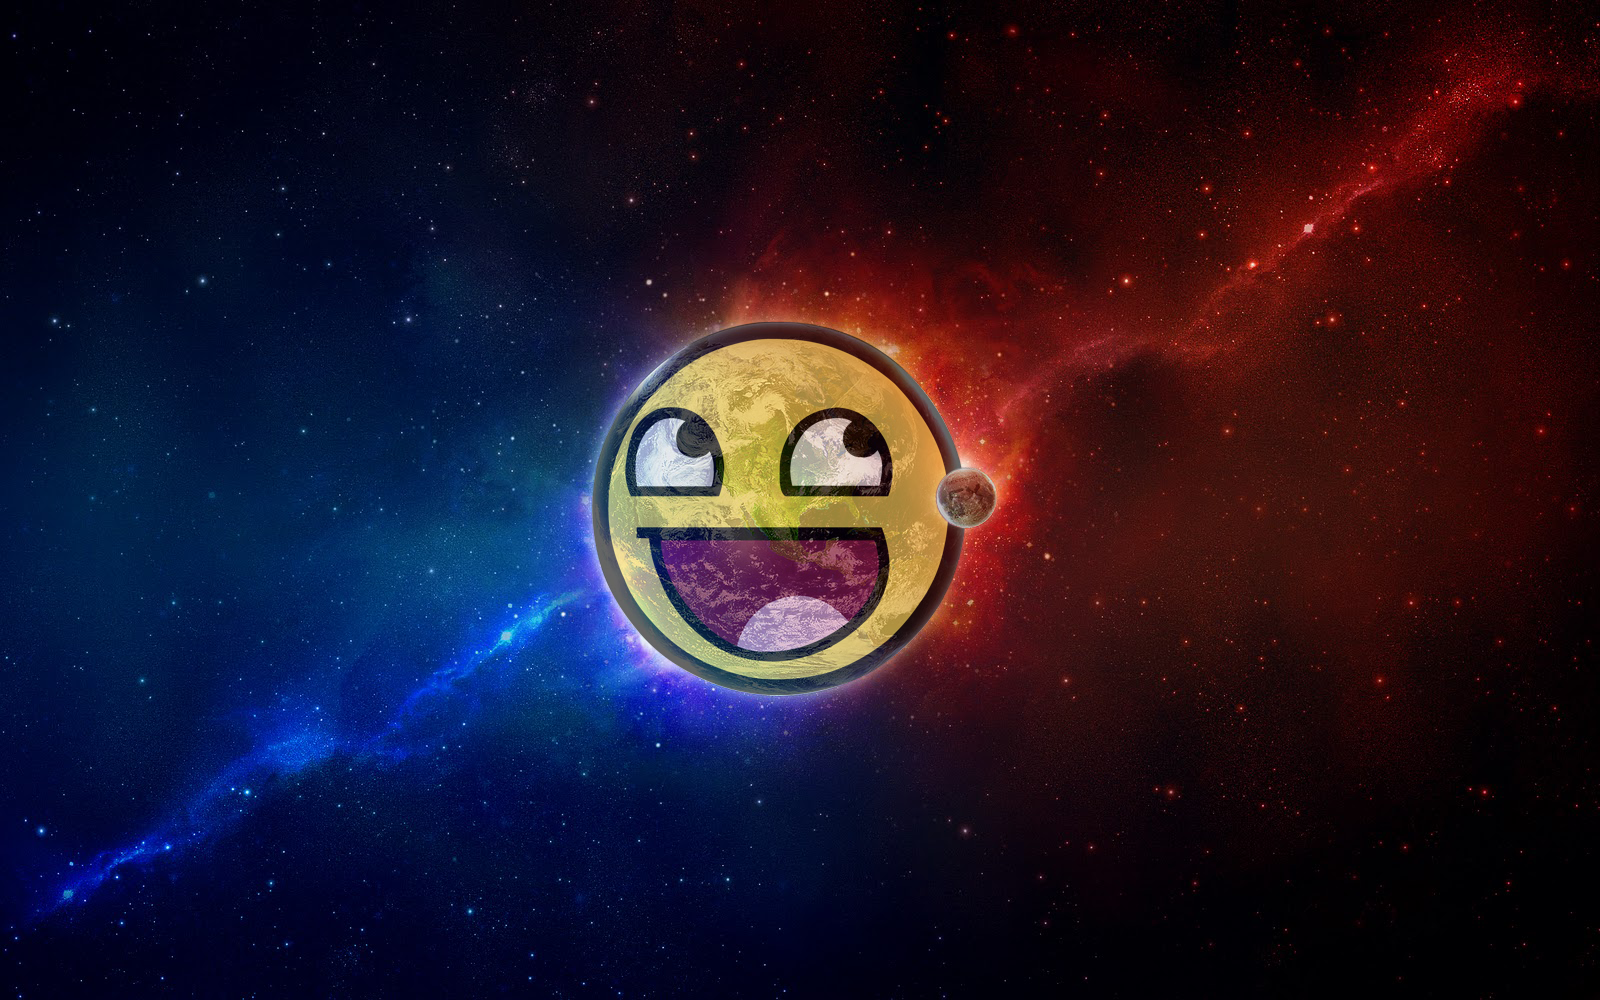 Space Planet Moon Earth Awesome Face Smiley Digital Art 1600x1000